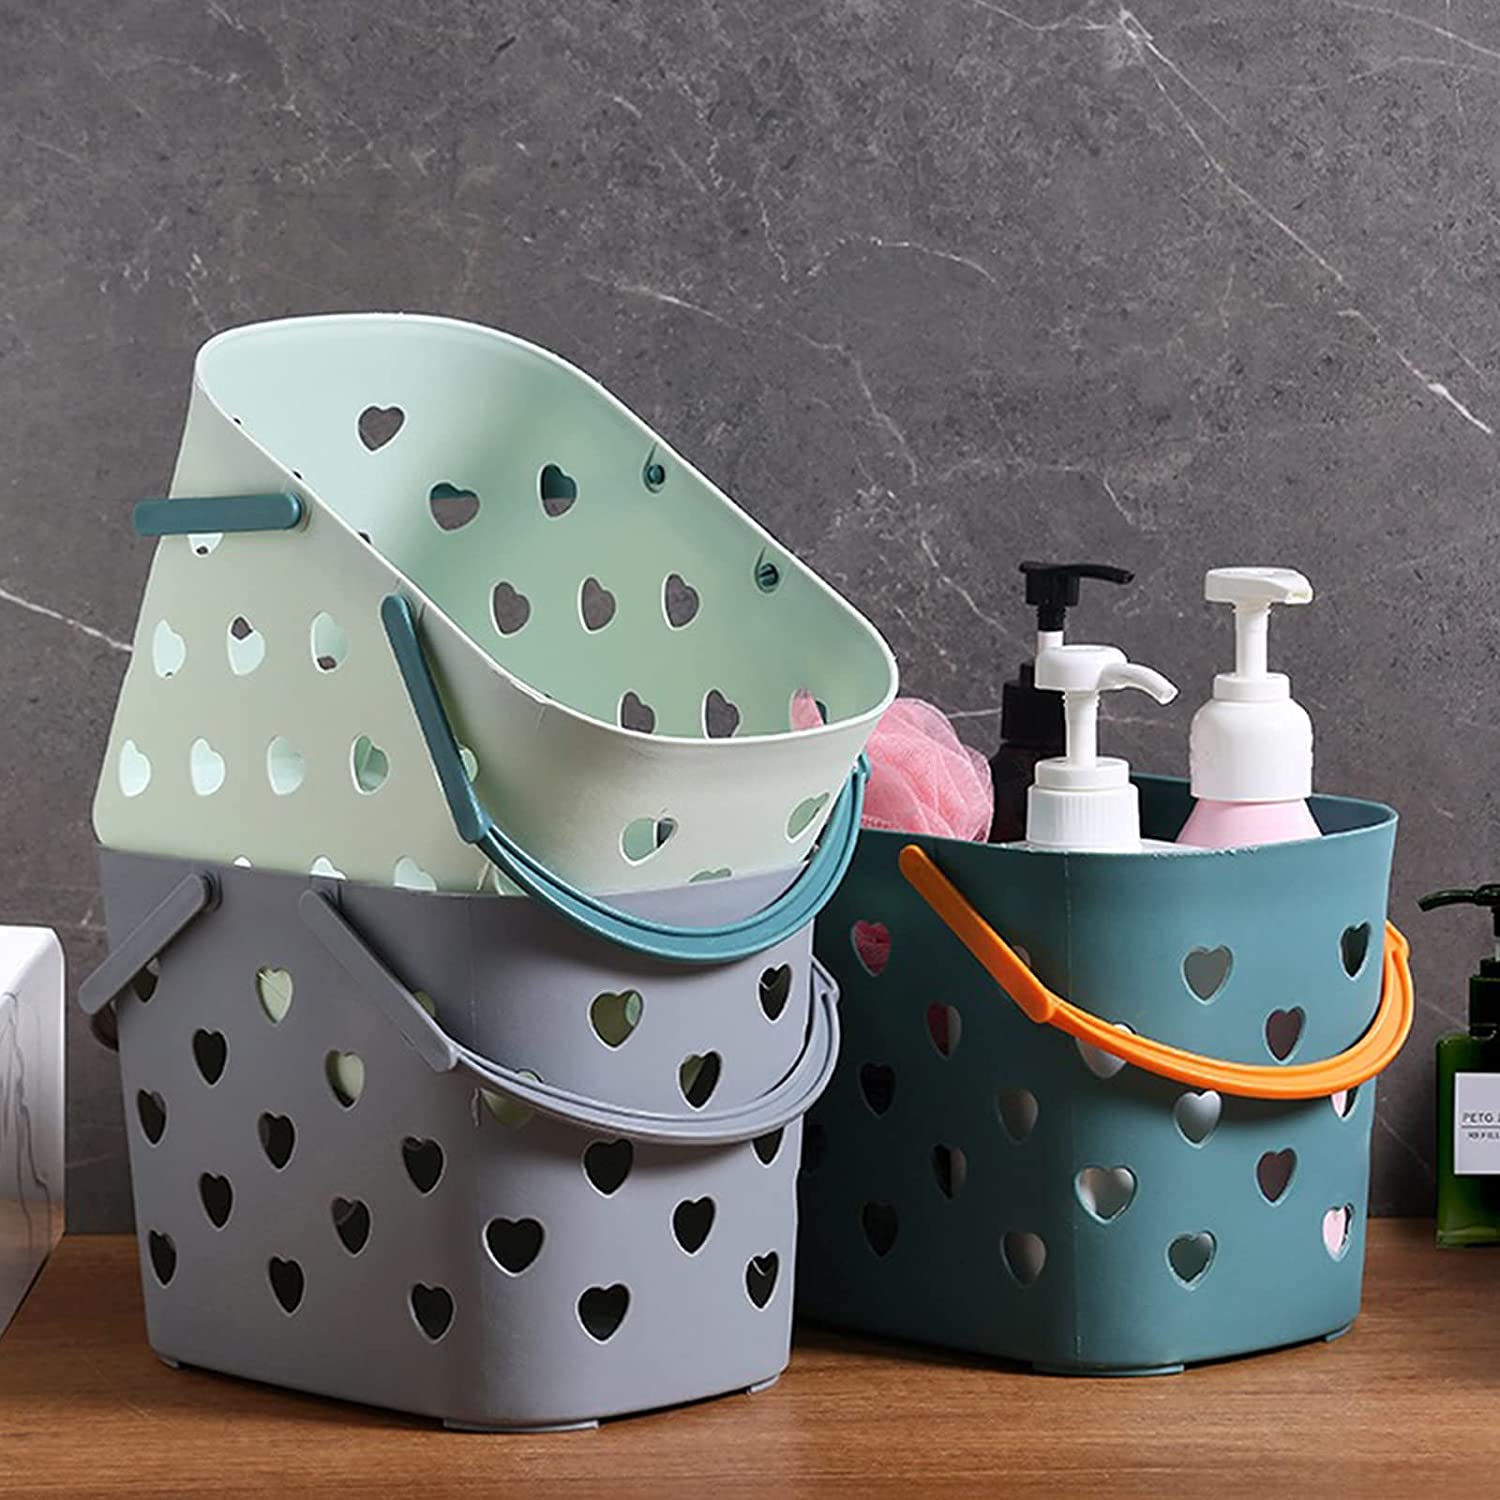 The Best Shower Caddies for College Students in 2022